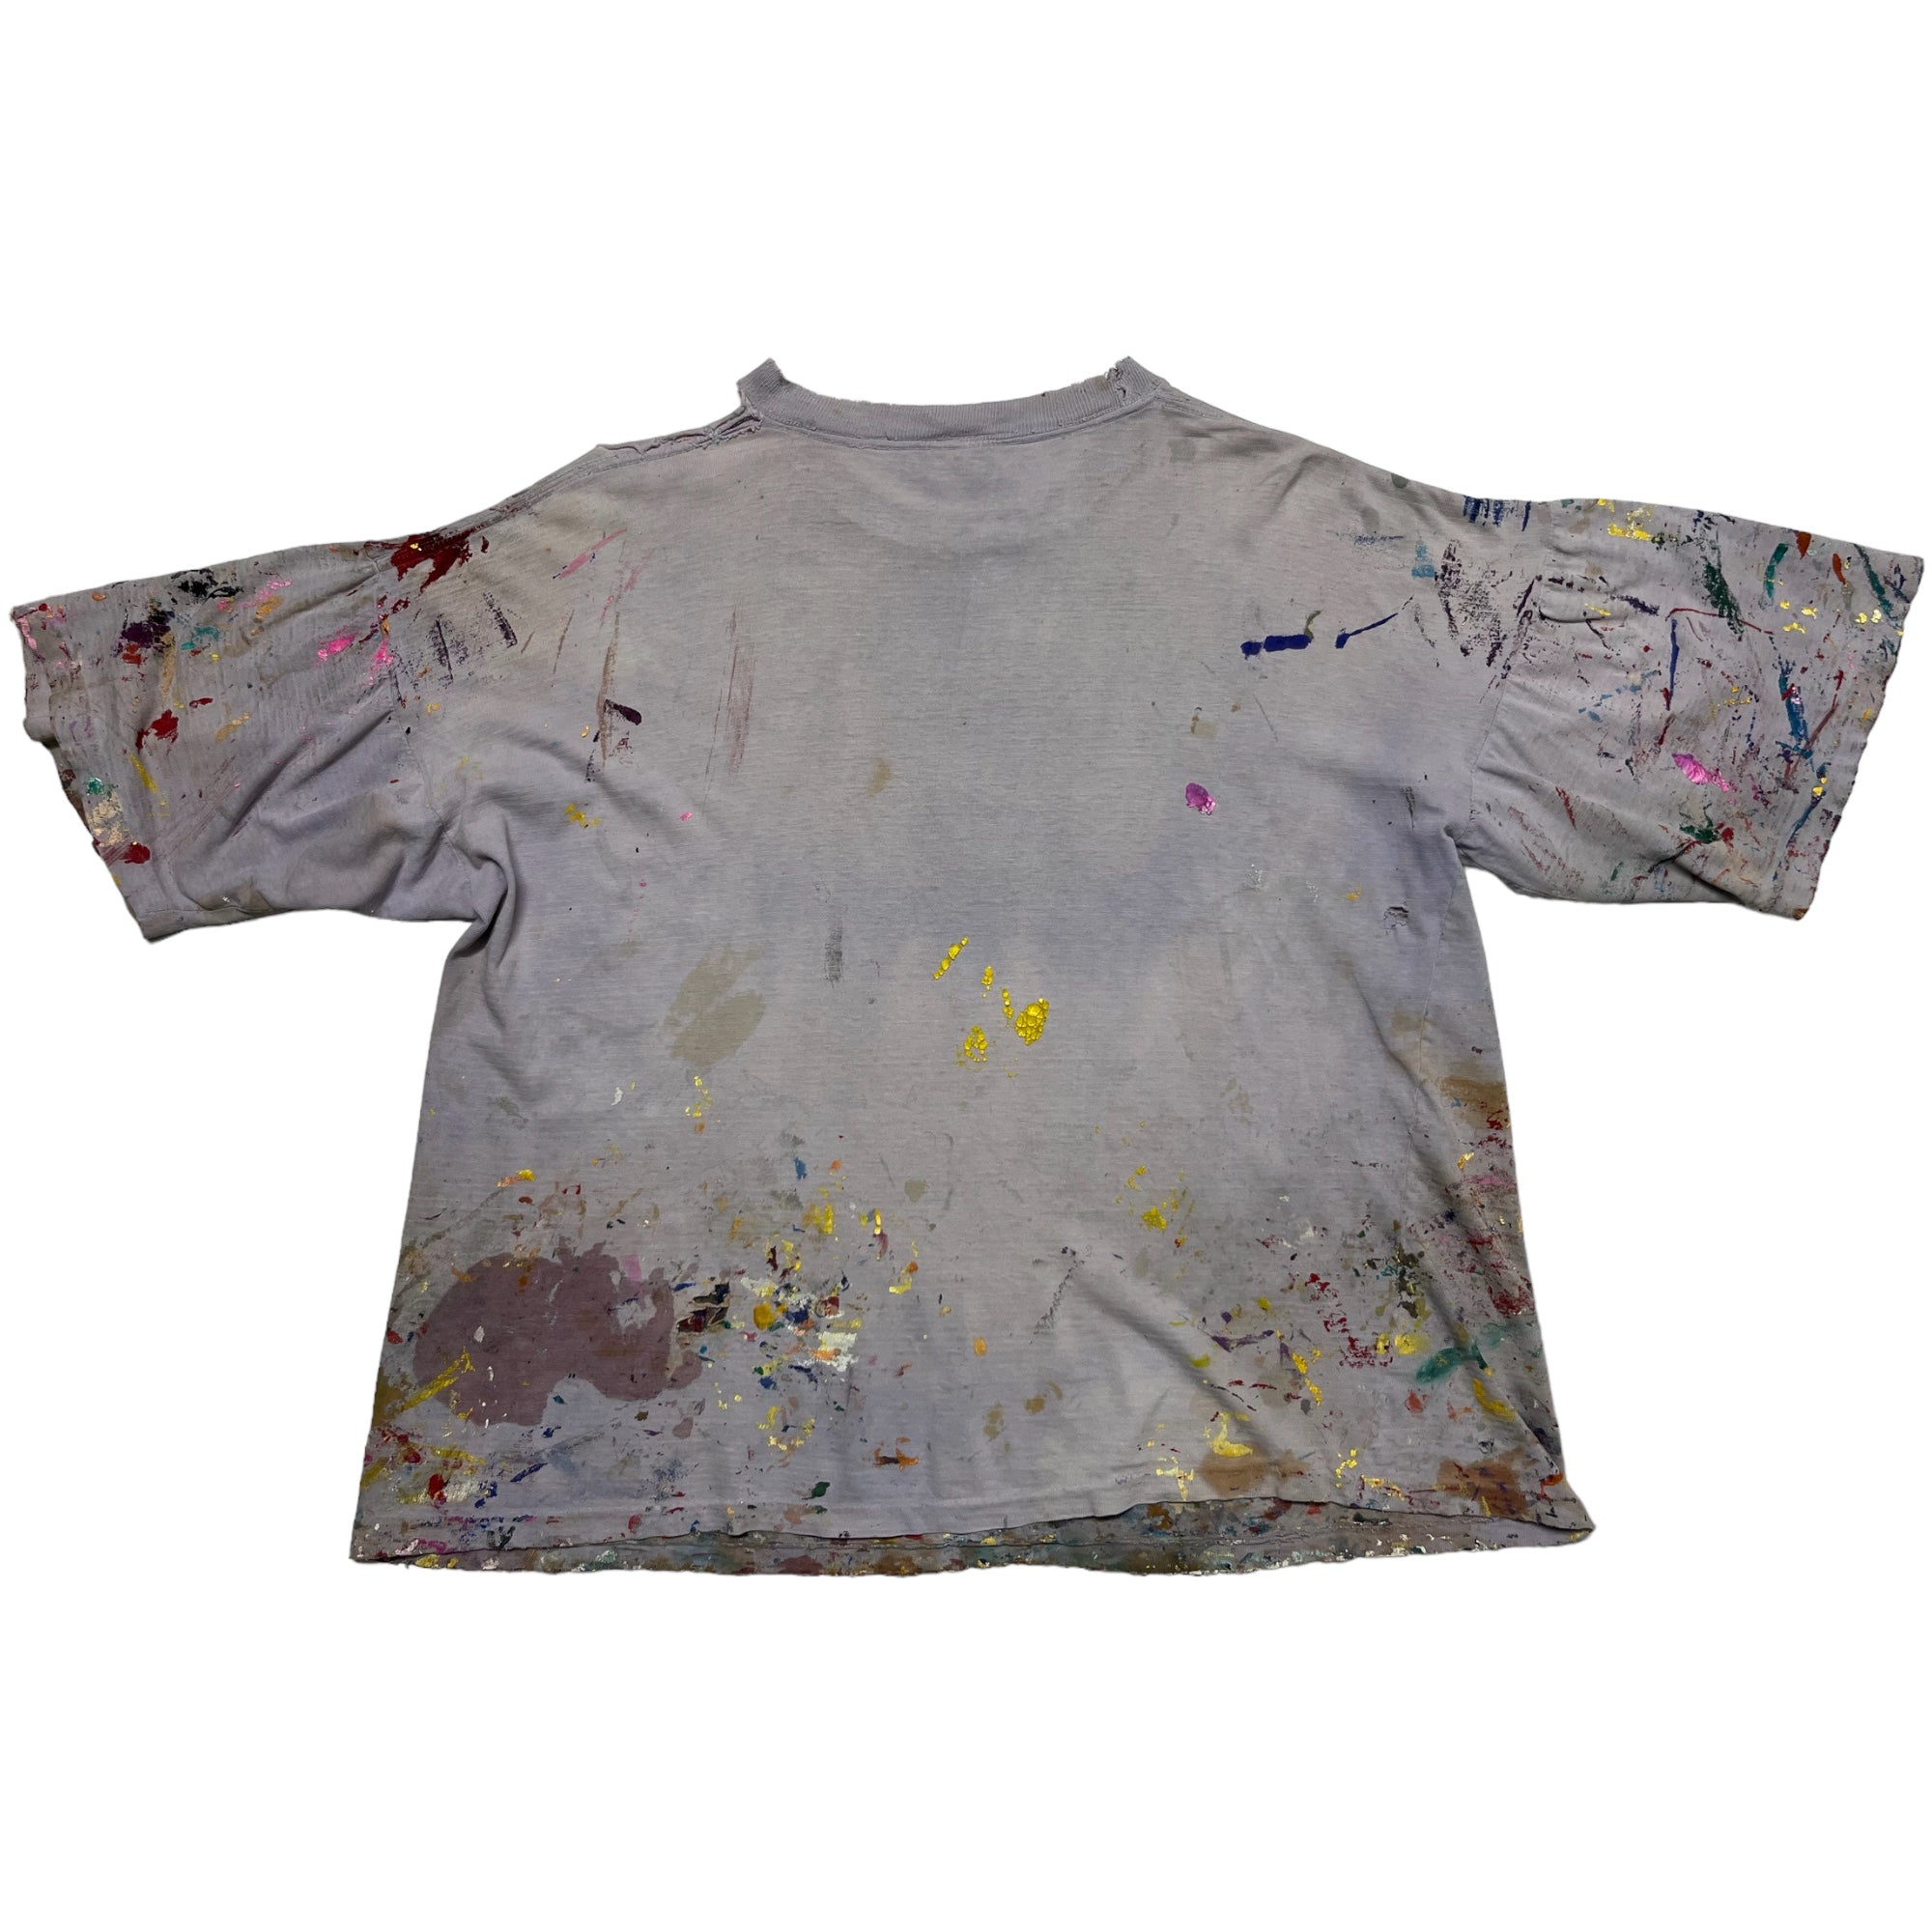 ‘90s Distressed Heavily Painted T-Shirt - Faded Lavender/Multicolor - M/L